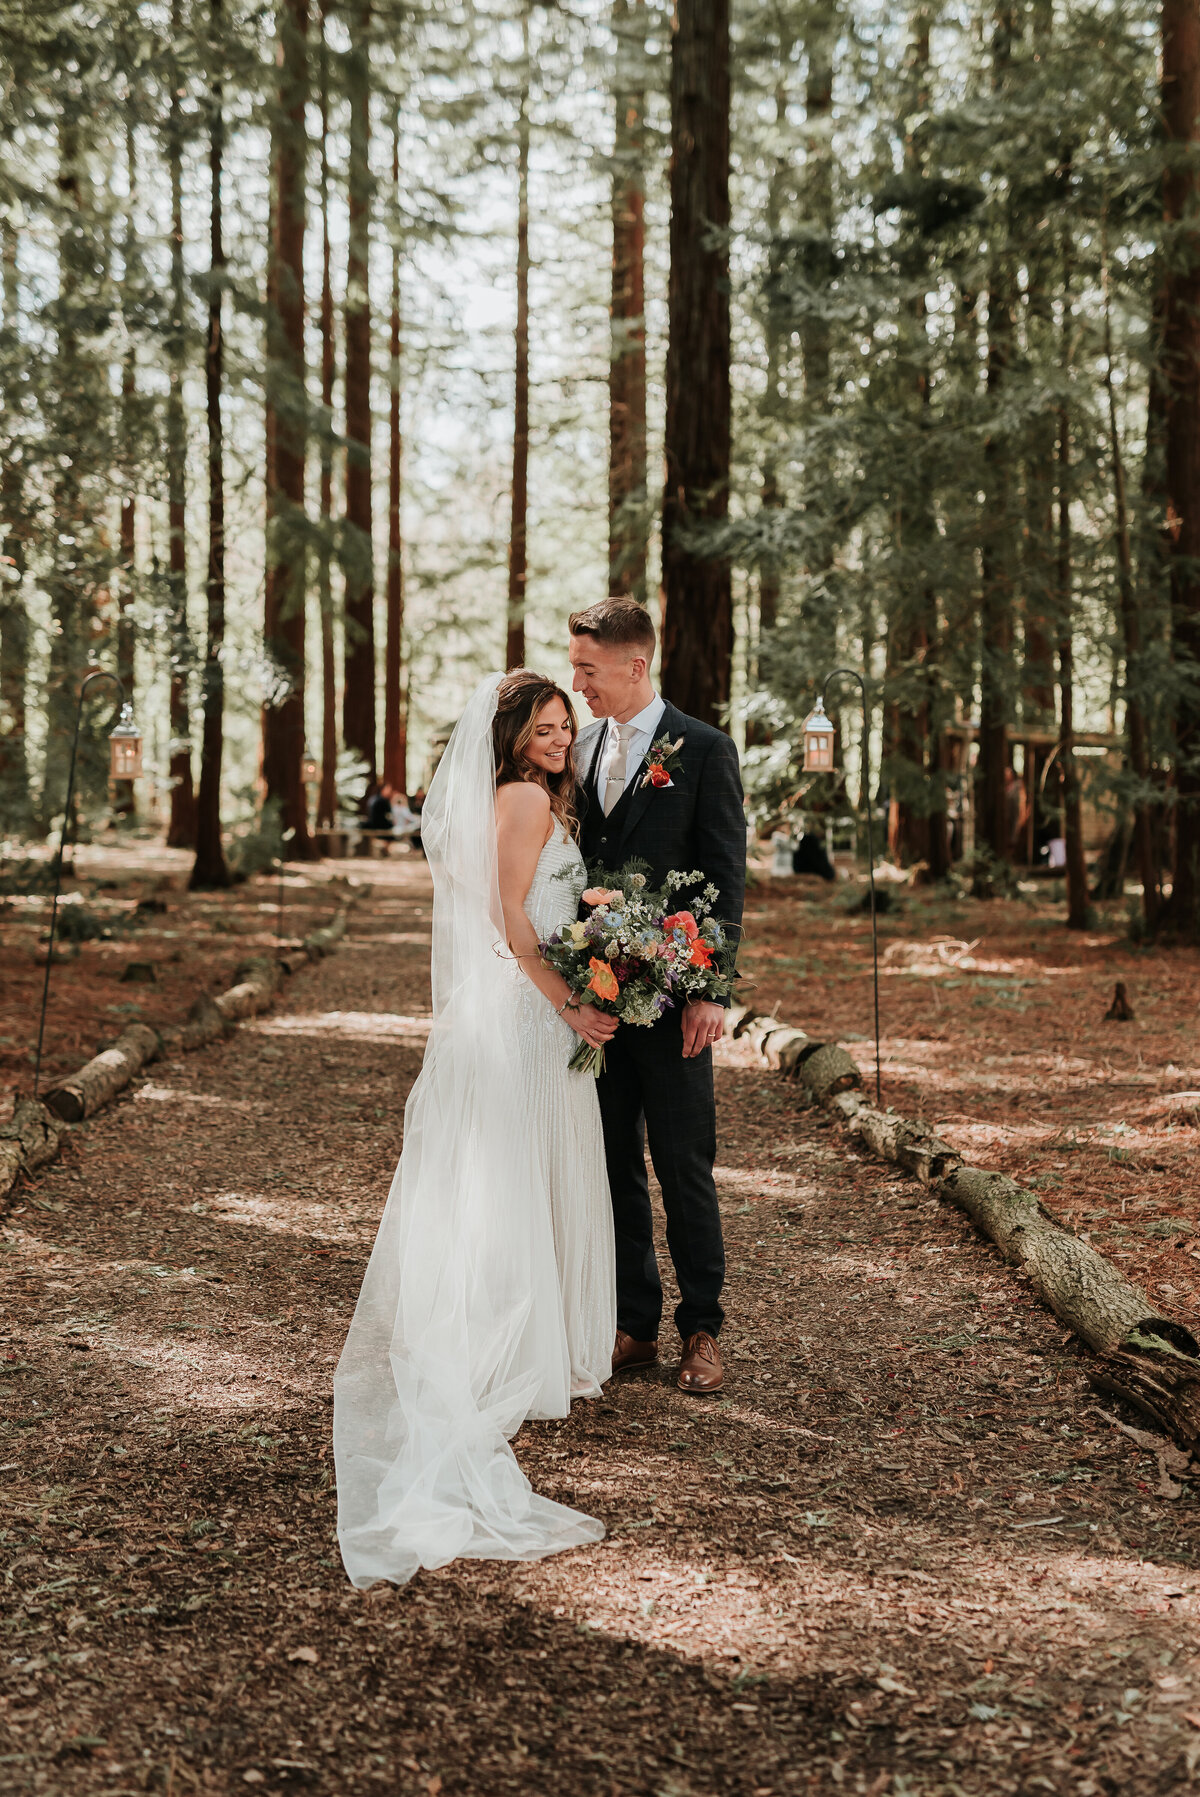 Bride & Groom standing along a woodland pathway holding a rustic wedding bouquet at their intimate woodland wedding at Two Woods Estate